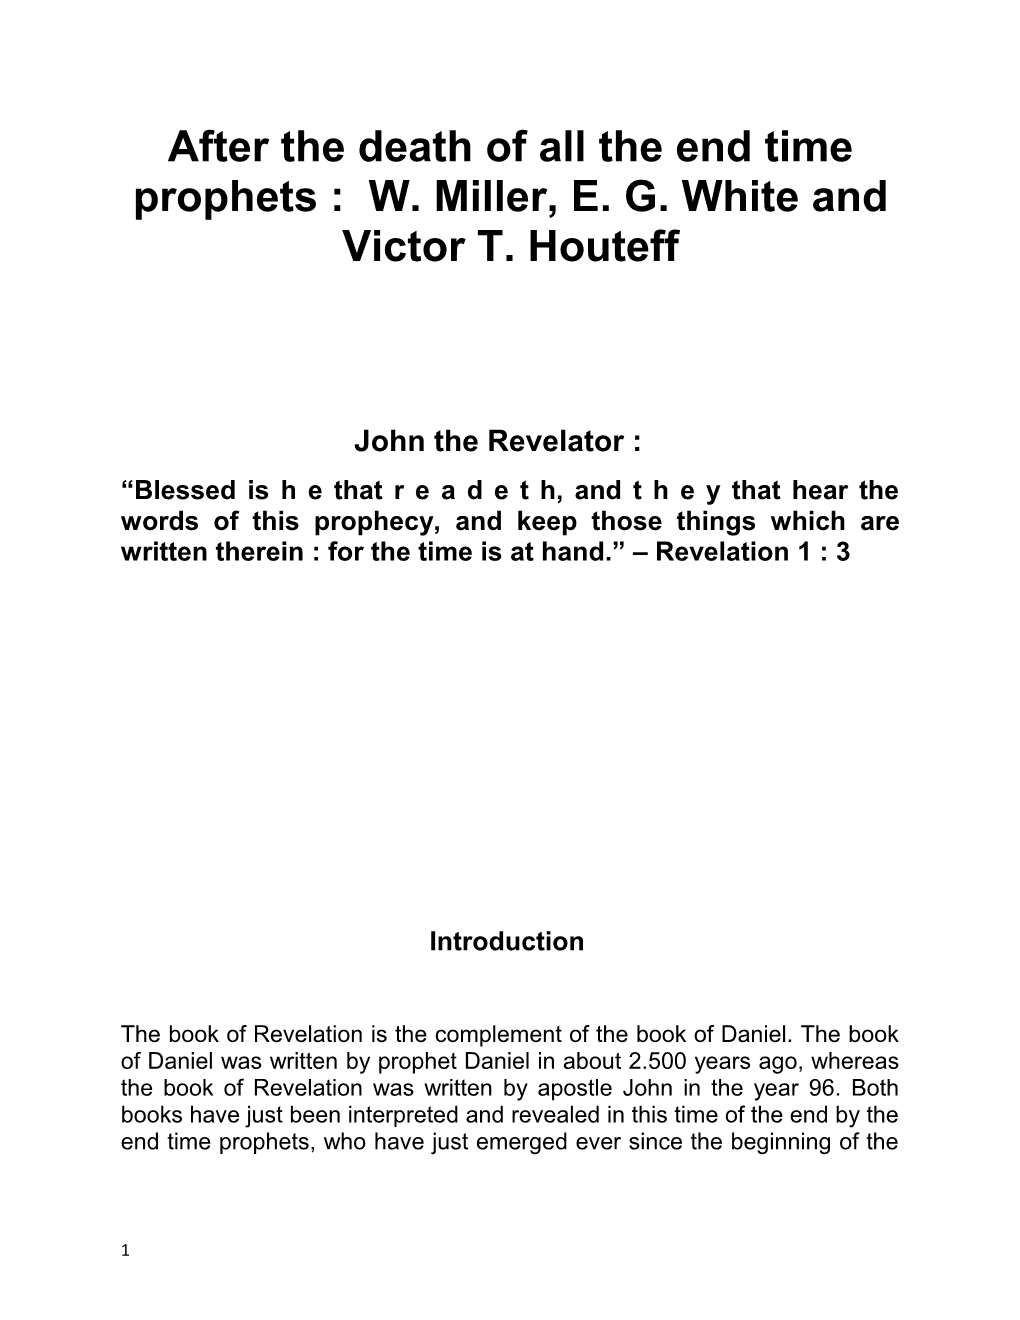 After the Deathof All the End Time Prophets : W.Miller,E.G. White and Victor T. Houteff